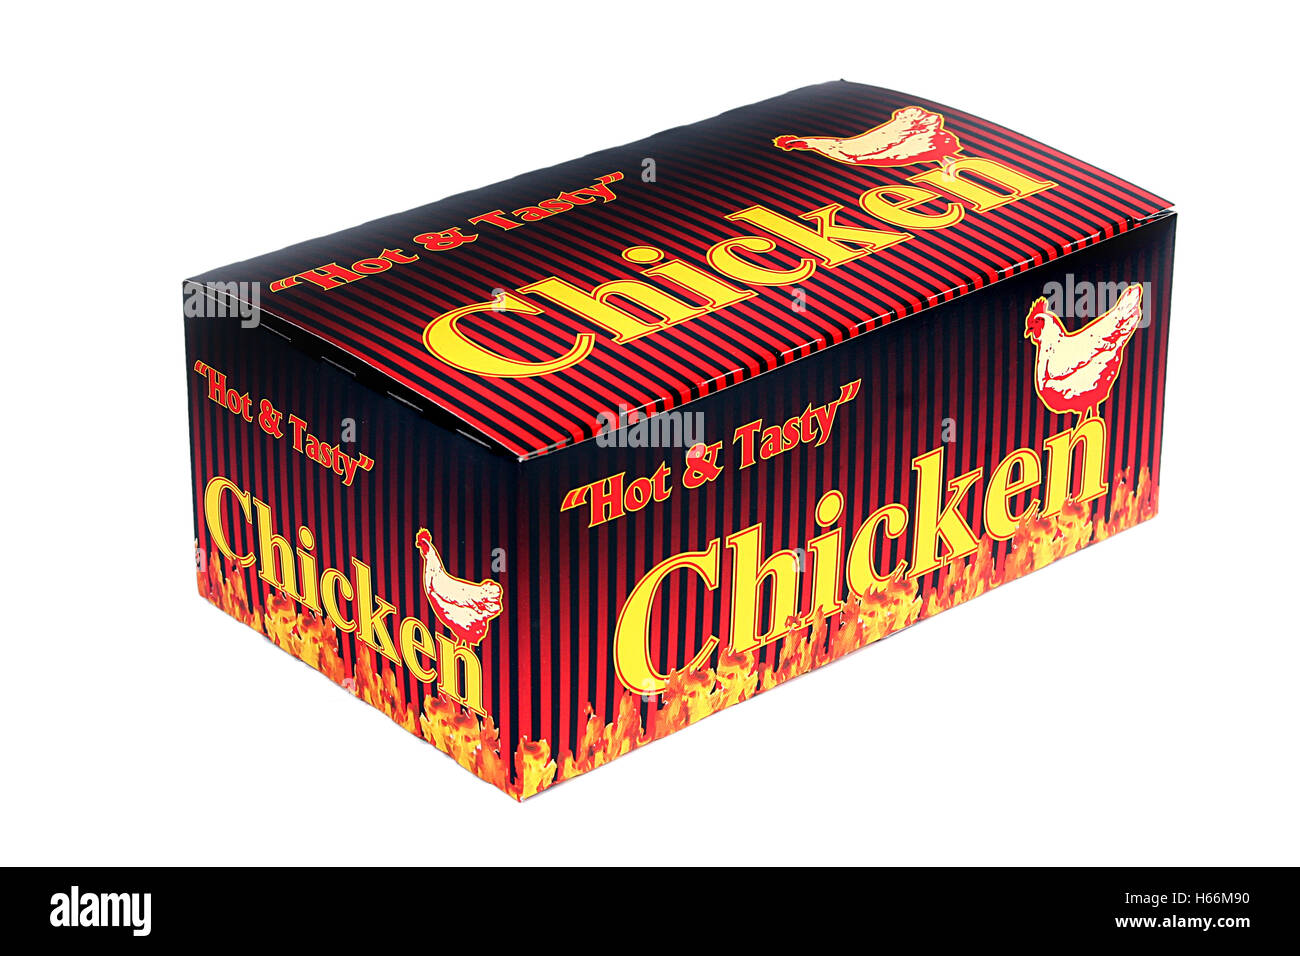 Meal box / Fried Chicken Packaging Stock Photo - Alamy